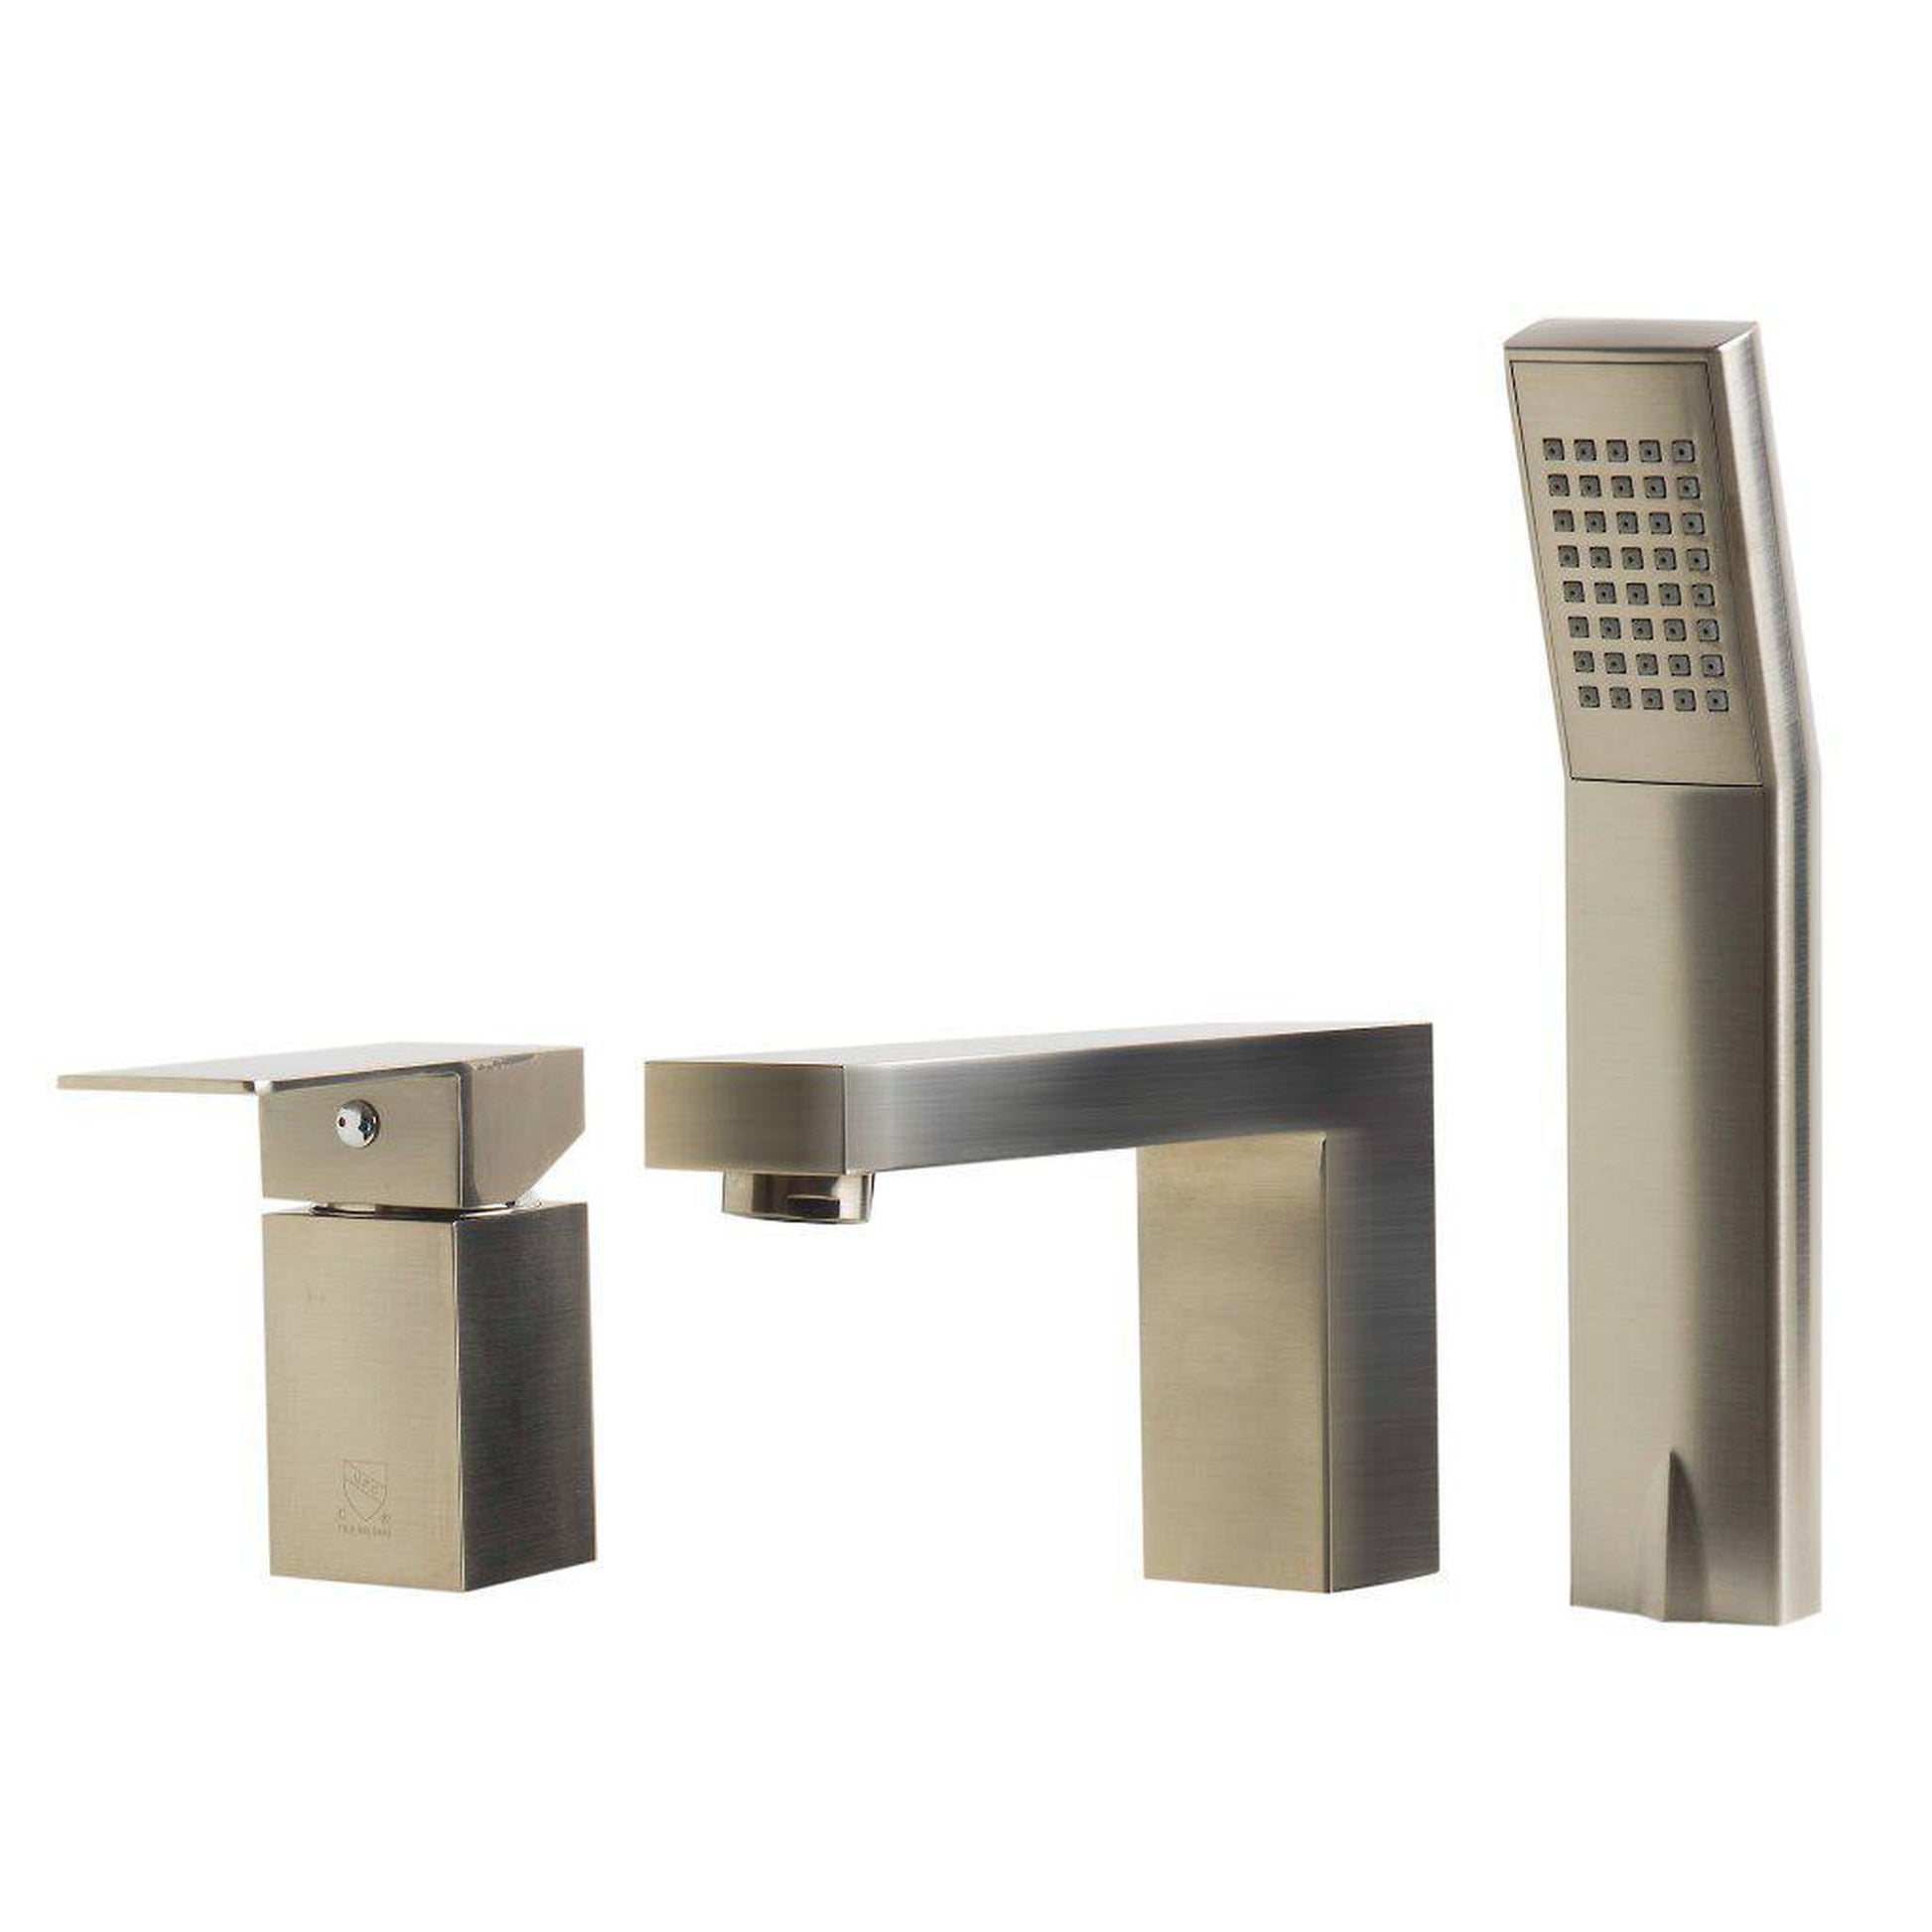 ALFI Brand AB2322-BN Brushed Nickel Deck Mounted Tub Filler With Square Hand Held Shower Head and Single Lever